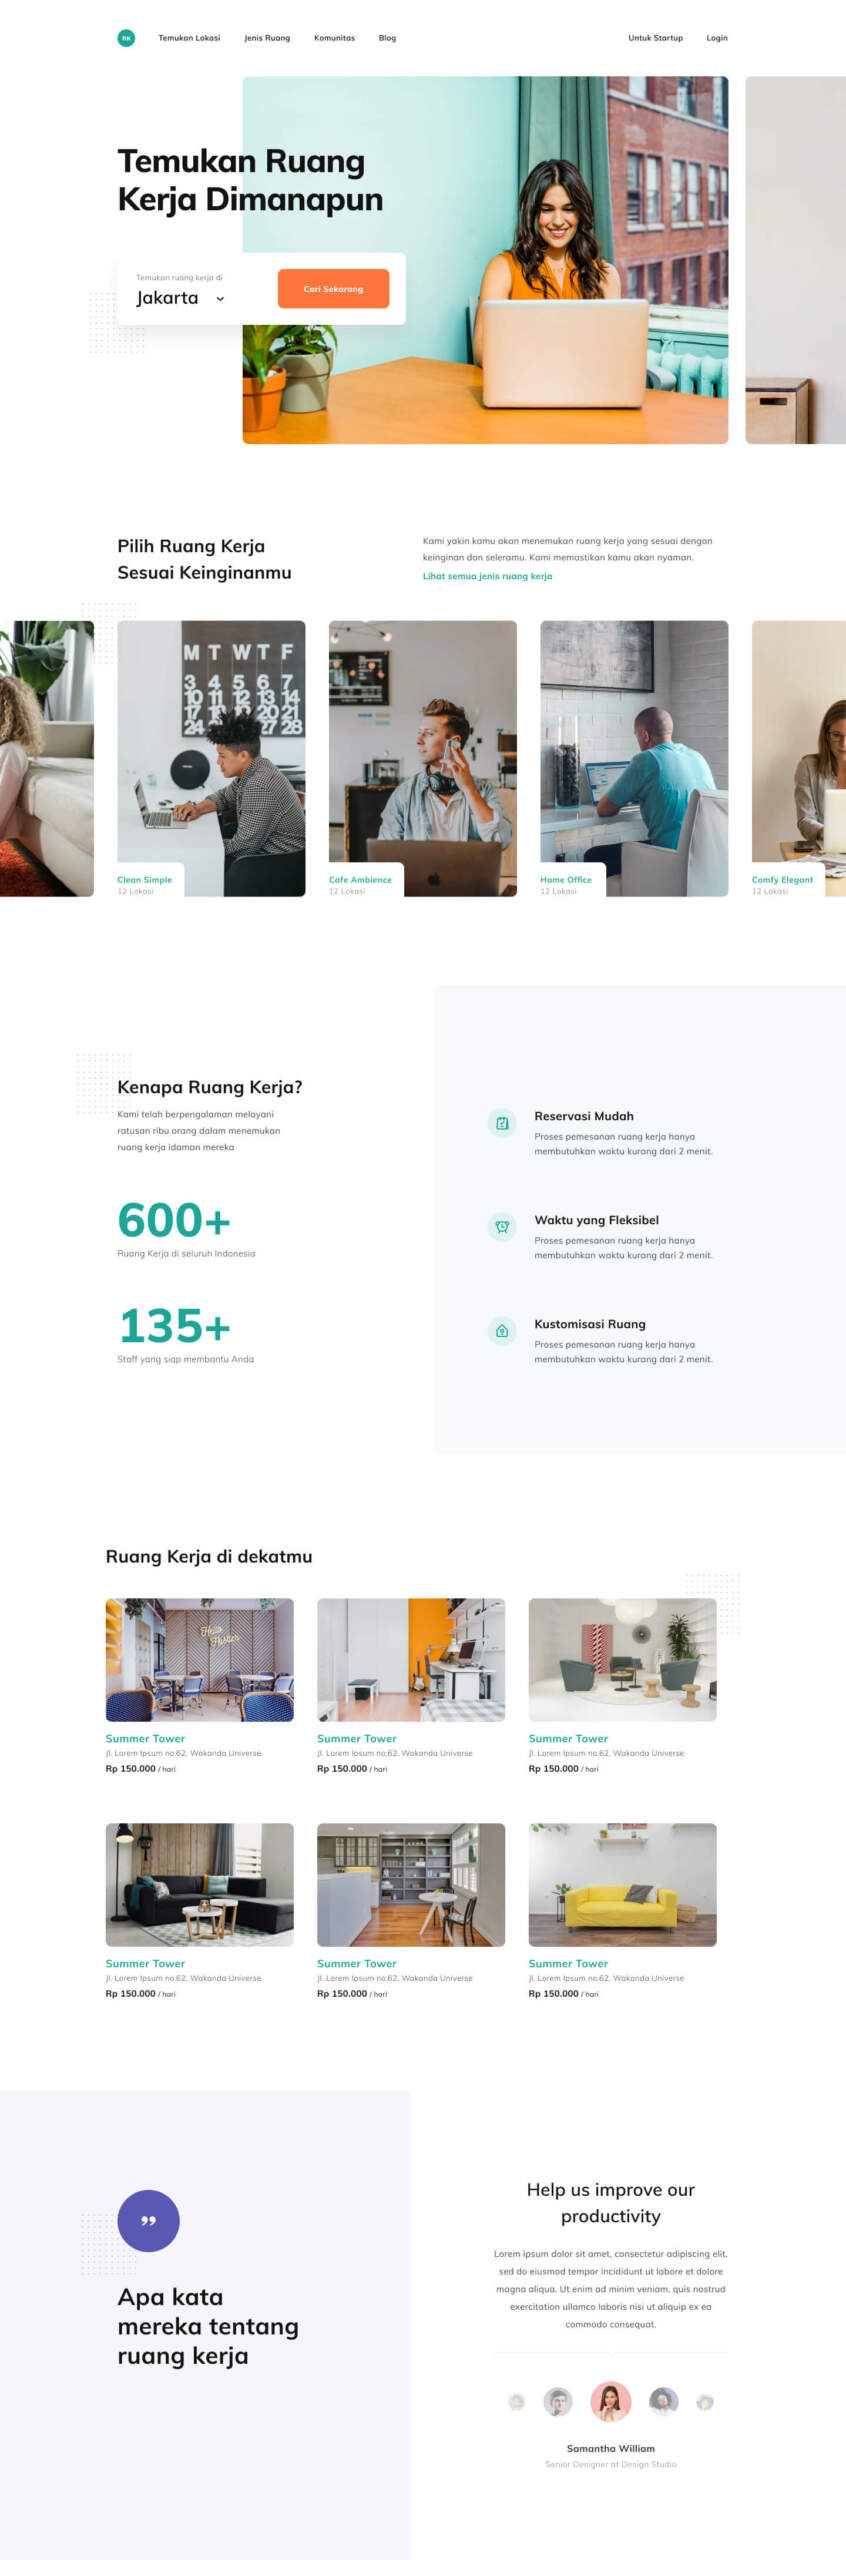 Coworking Space Landing Page